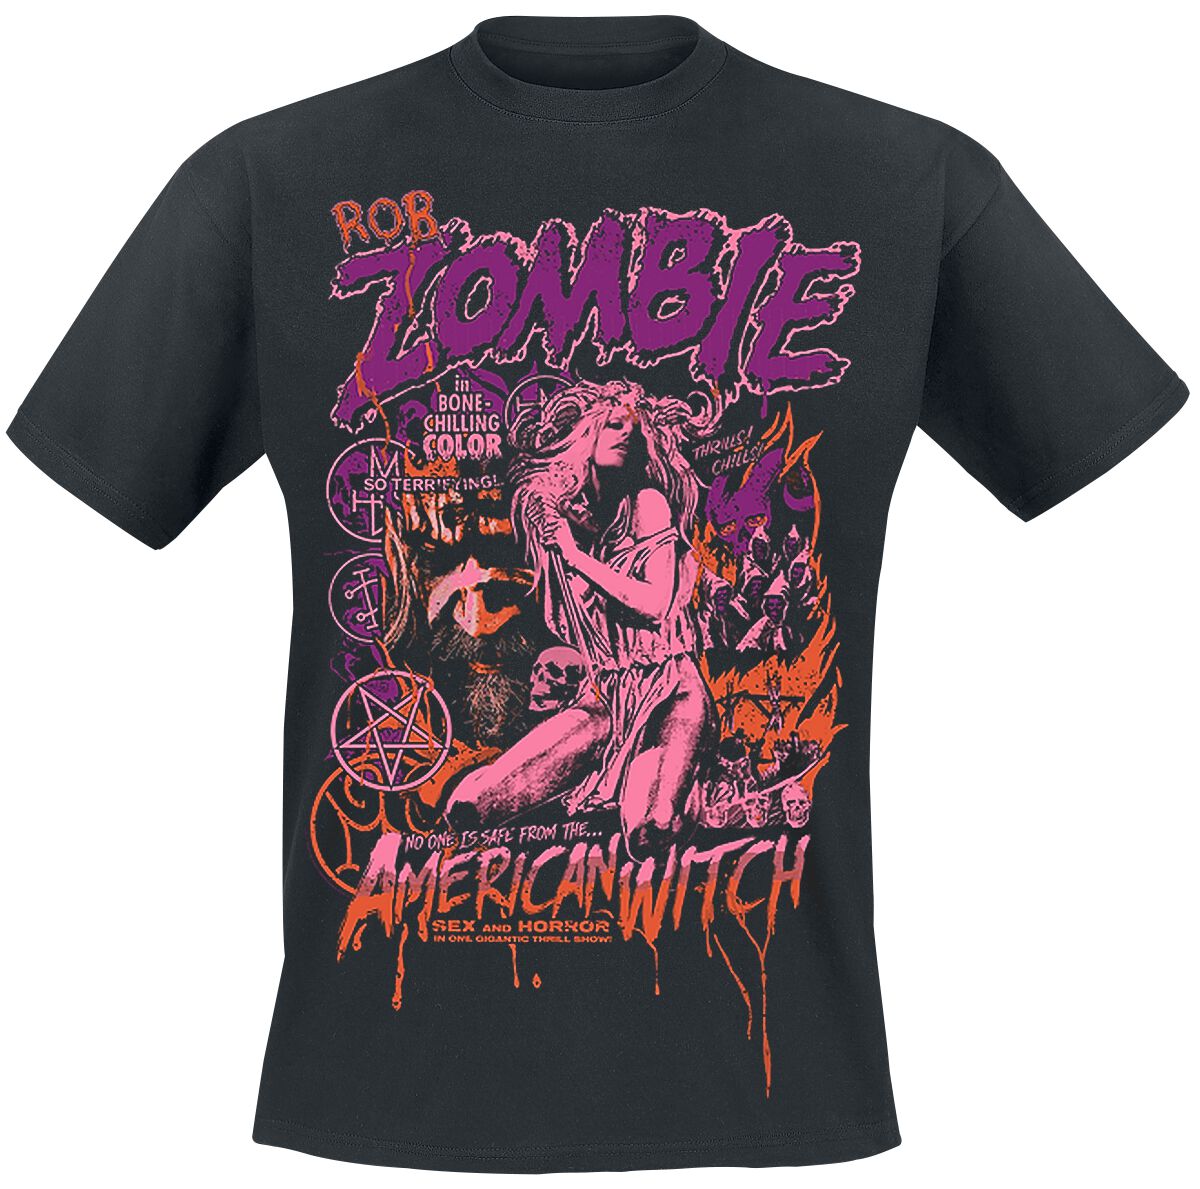 Rob Zombie American Witch 22 T-Shirt black